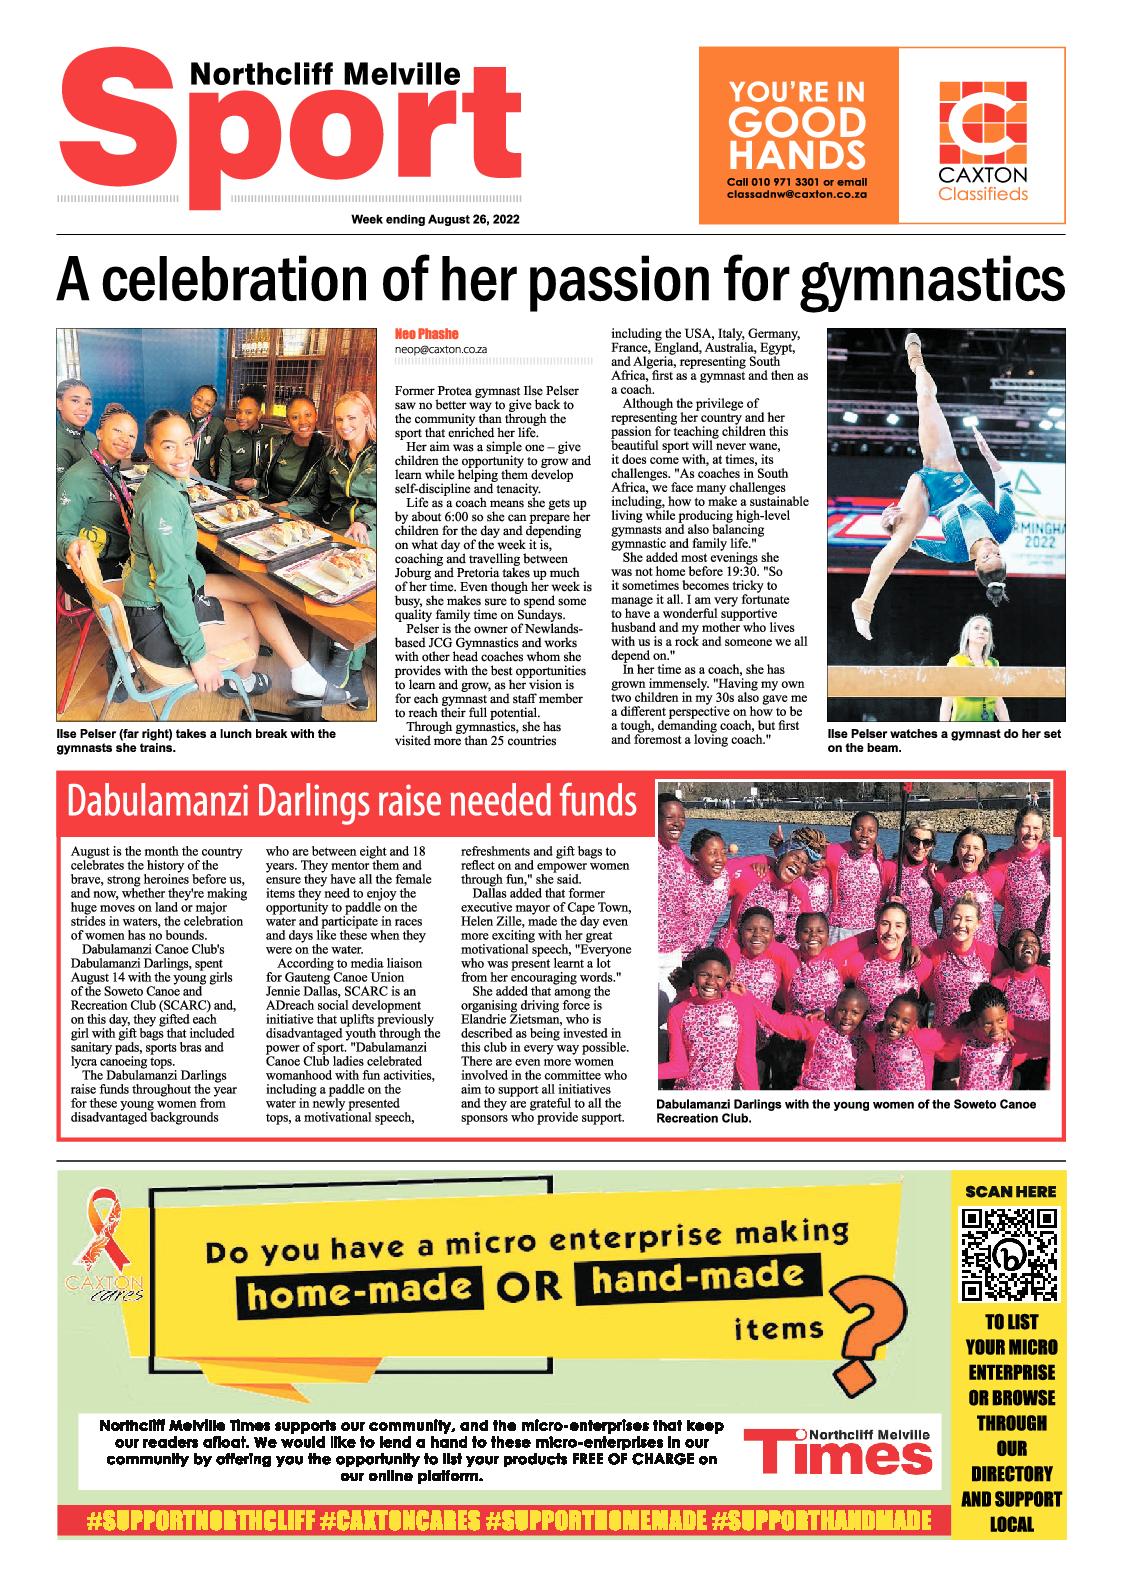 Northcliff Melville Times August 26 2022 page 16